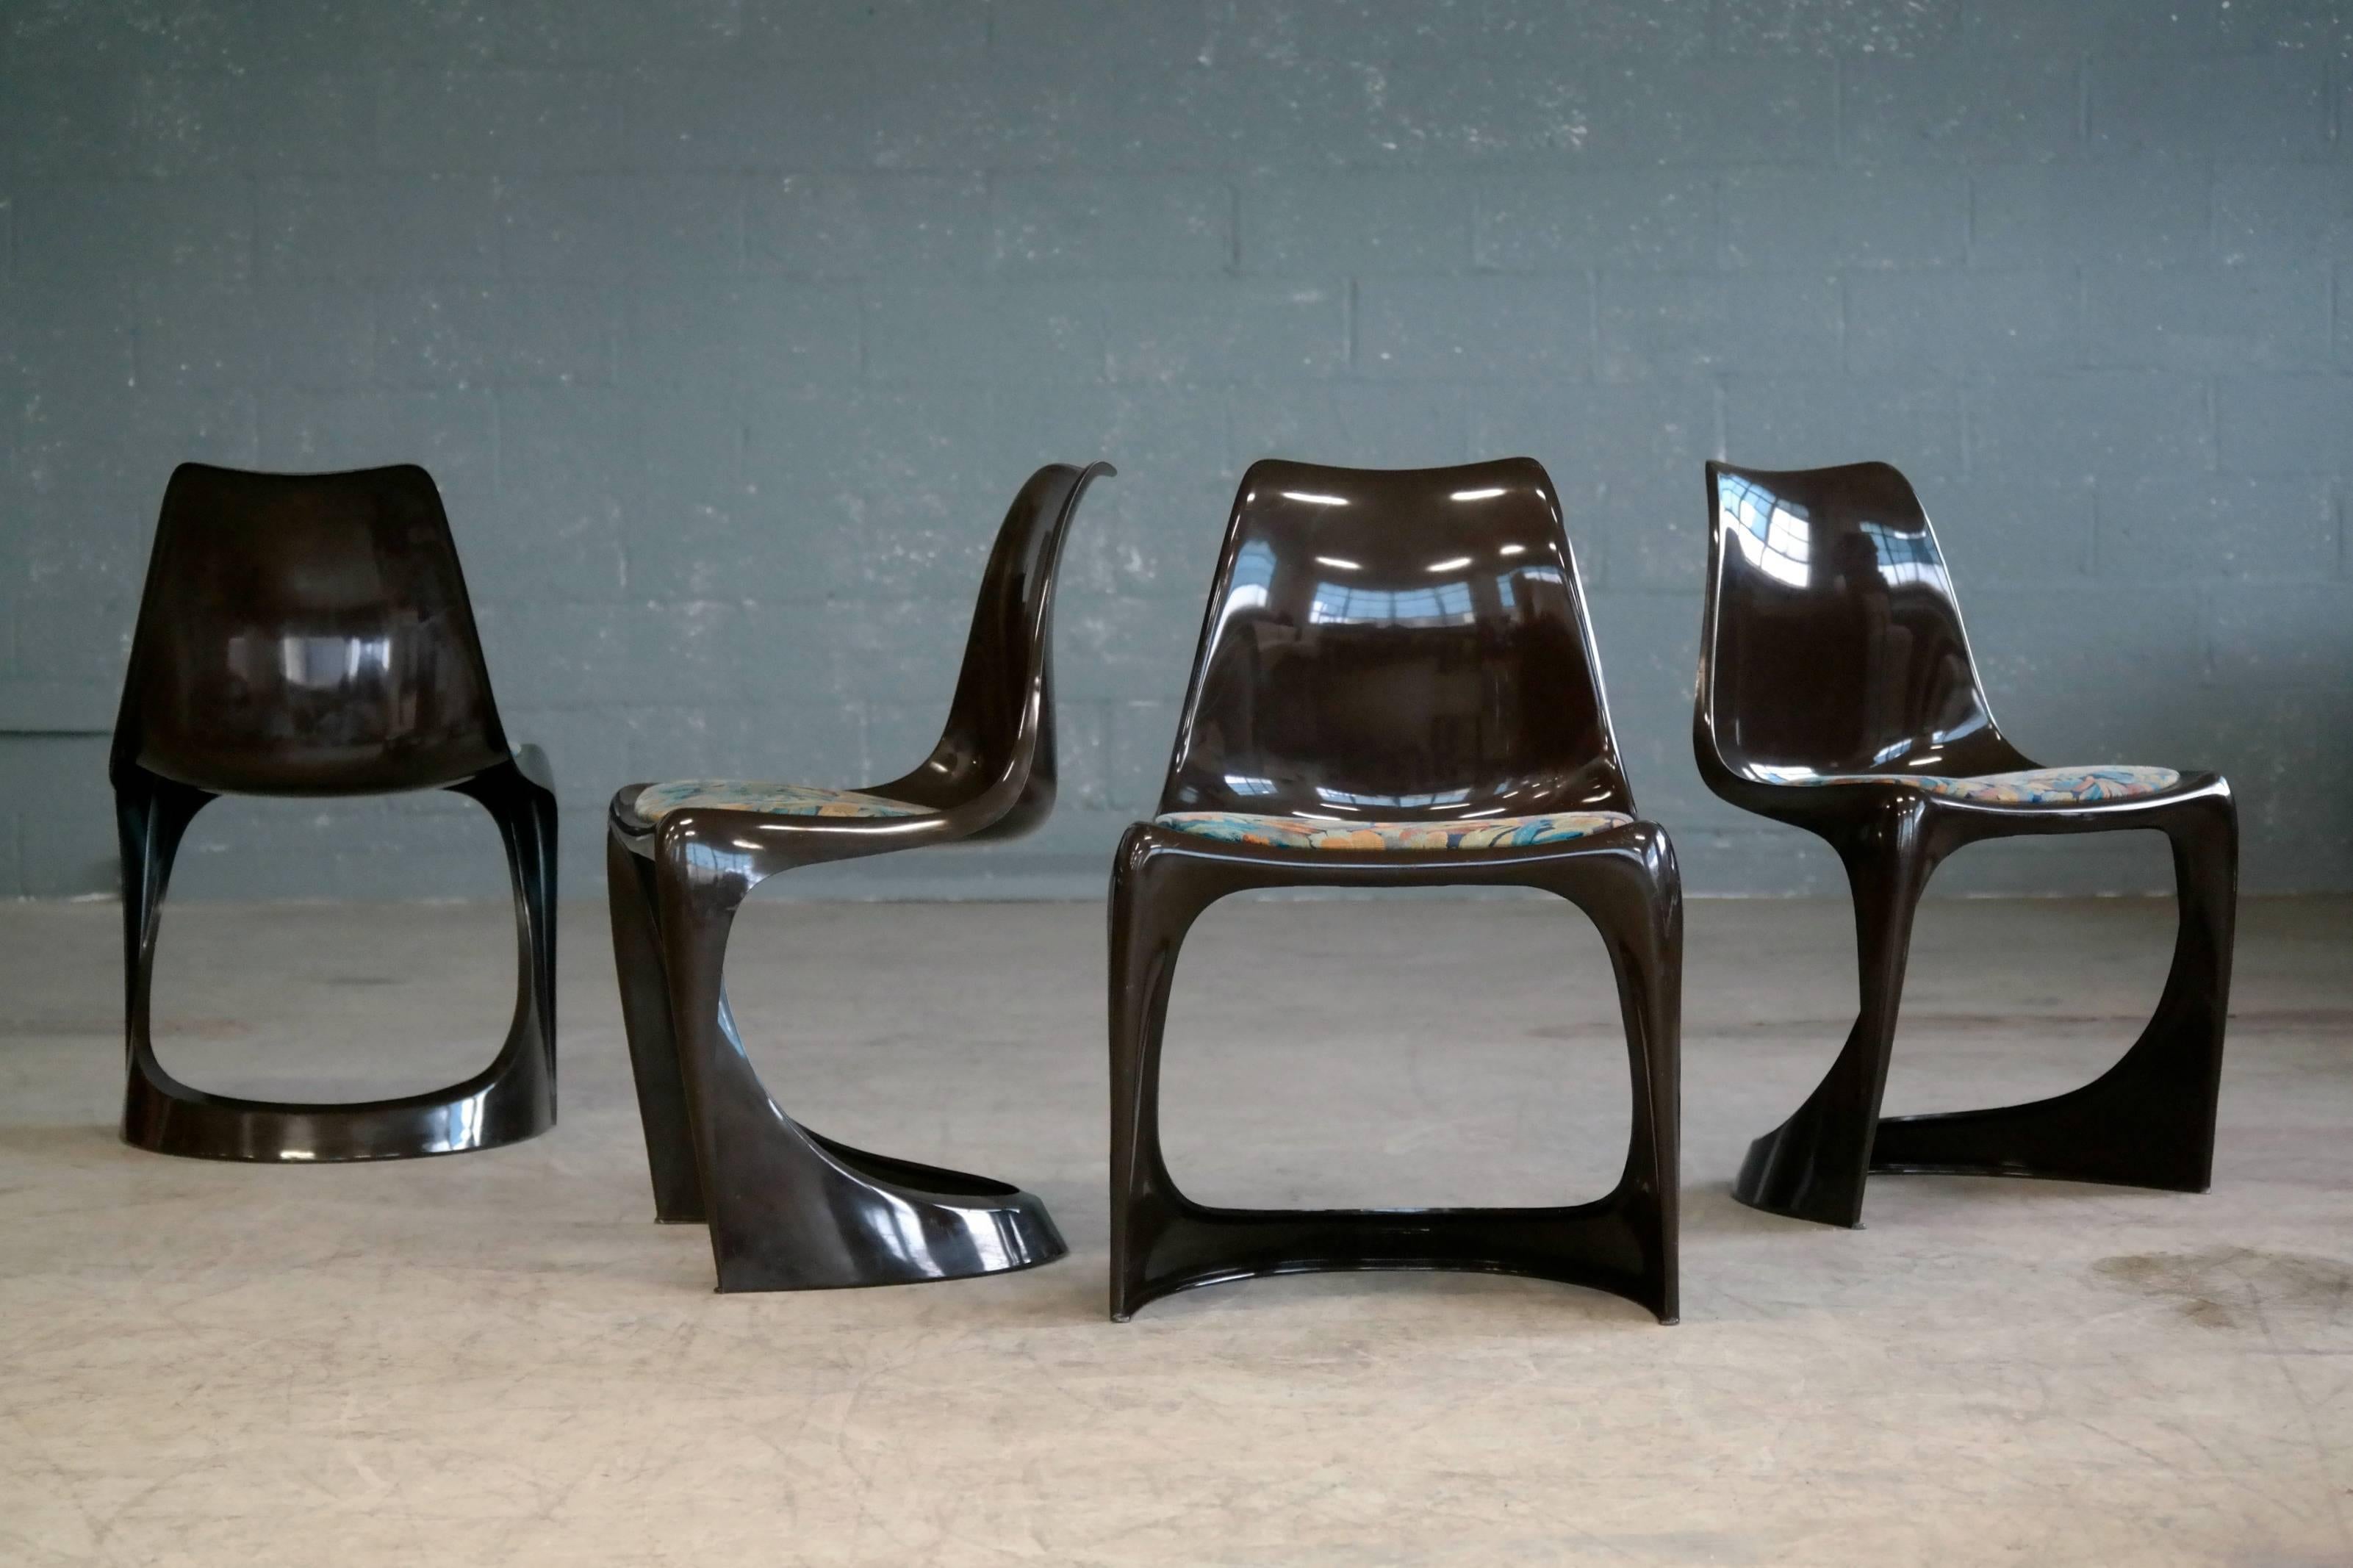 Set of four ultra cool dining chairs Model 290 in brown molded plastic designed by Steen Østergaard for Poul Cadovius in 1966. The chairs are stackable and were made to be a perfect match to a series of aluminum dining tables also produced by